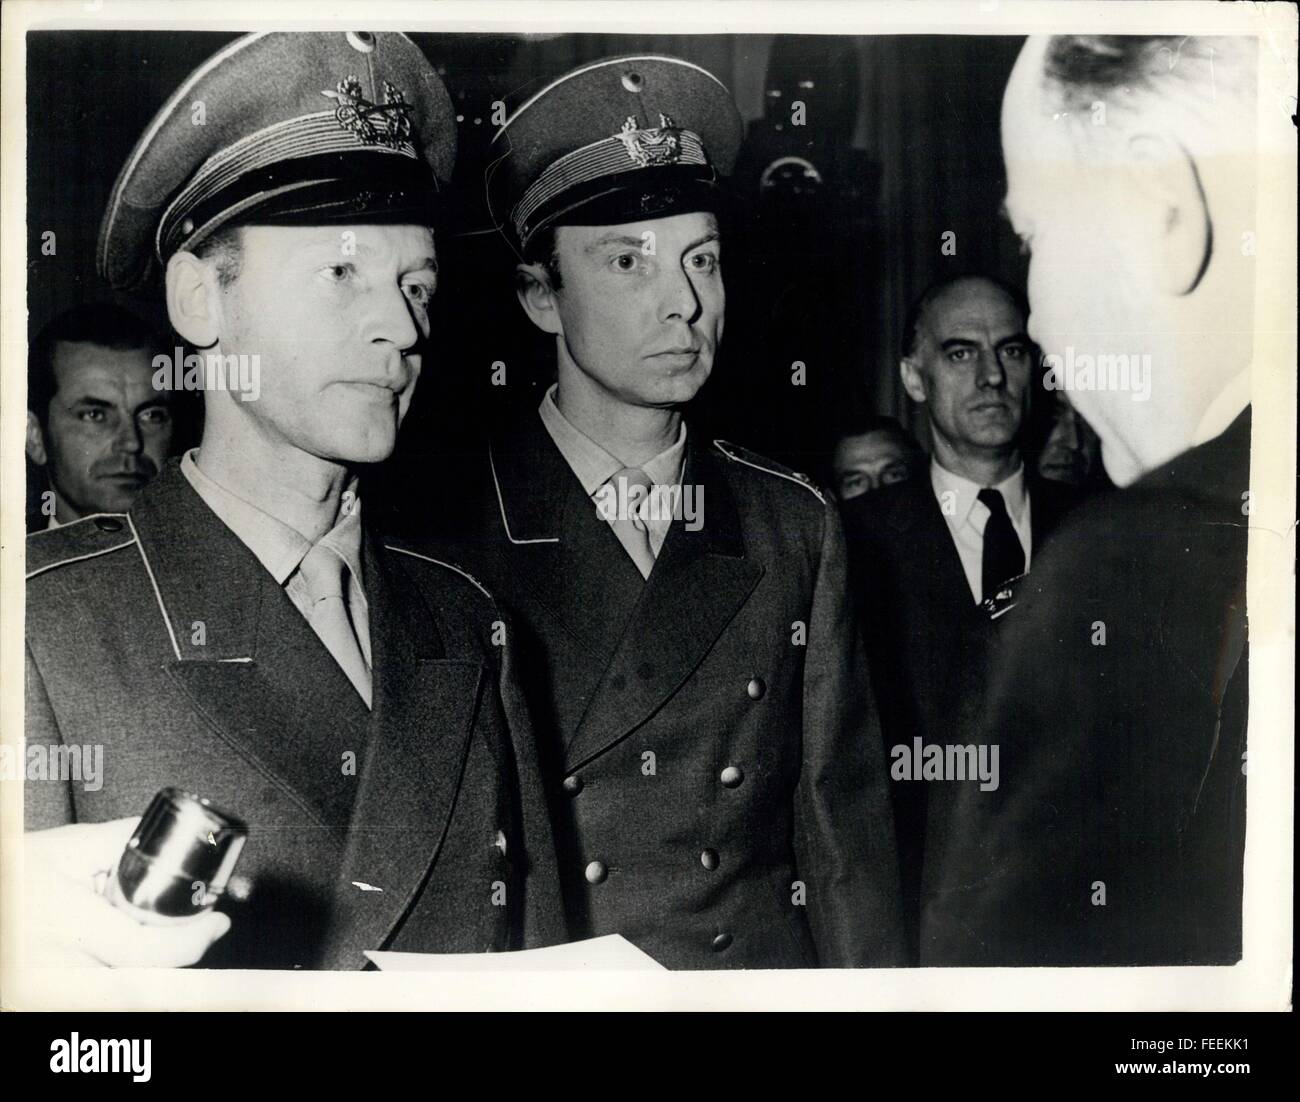 1947 - Commissioning Of The German Army In Bonn. Newly Appointed Majors: Herr Blank the West German Minister of Defence handed over commissions to Herr Heusinger formed German Army - during a ceremony in Bonn today, in which the first 100 soldiers of the Federal Republic's army appeared. Photo Shows: Minister Theodor Blank with a major of the new German Army (right) and a Major of the new German Air Force on left - during the ceremony in Bonn today. © Keystone Pictures USA/ZUMAPRESS.com/Alamy Live News Stock Photo